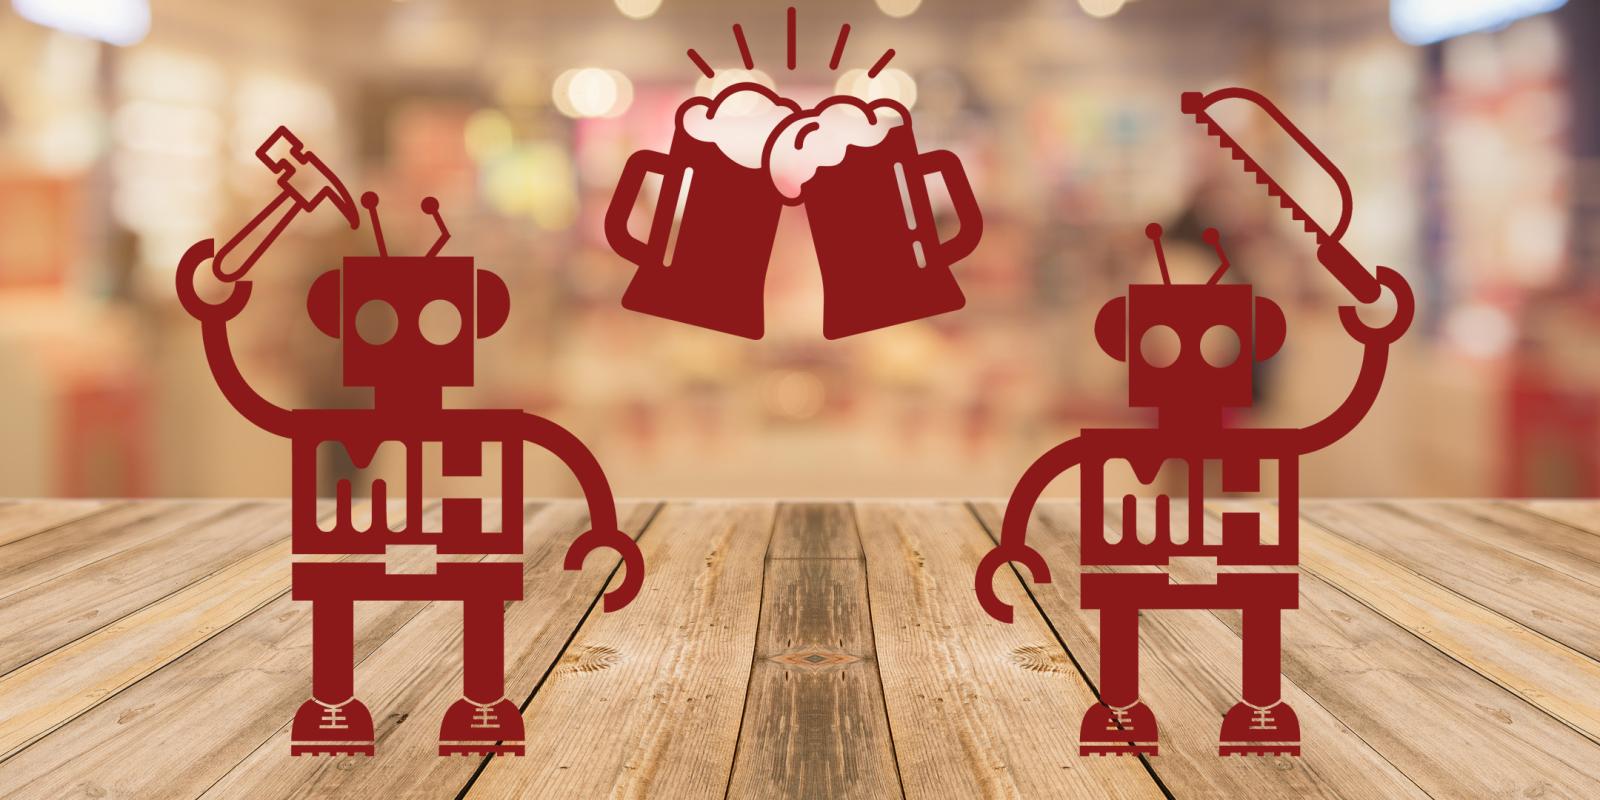 Two red robot swith MH logos holding up woodworking tools (a hammer and a saw)